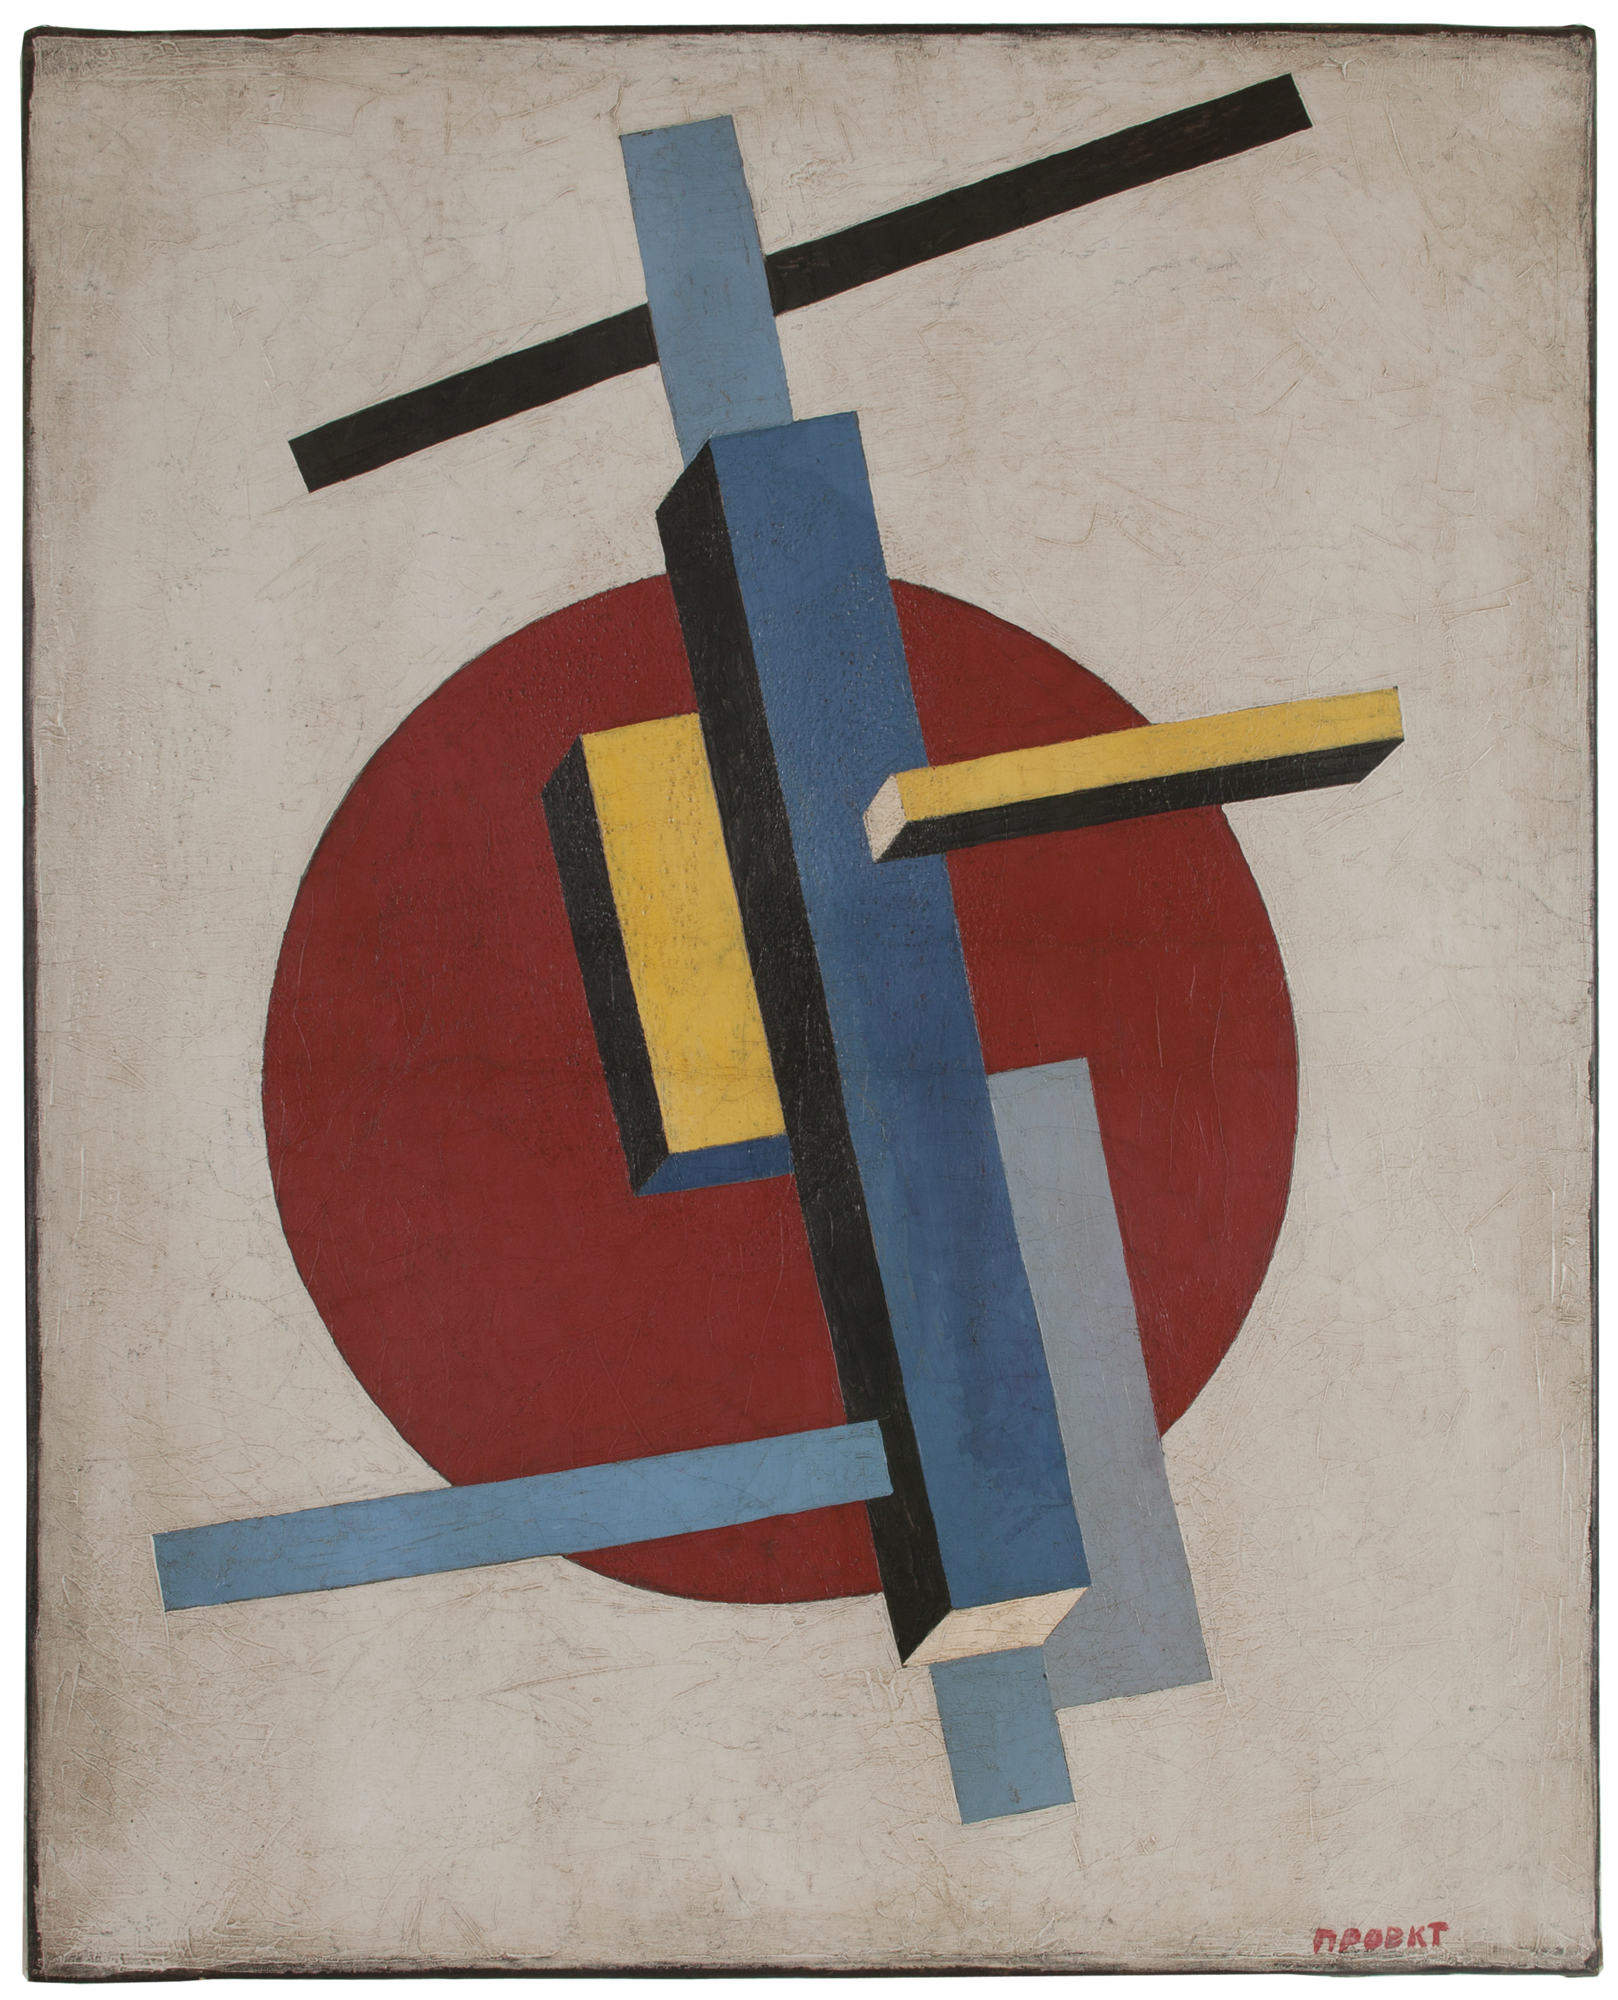  Unattributed. Unsigned.&nbsp;Text in Russian, lower right corner,&nbsp;translates to “Project”.&nbsp;Oil on Canvas, 75.5 x 65.5 cm.    Click here to watch the film: I FOUND MALEVICH   